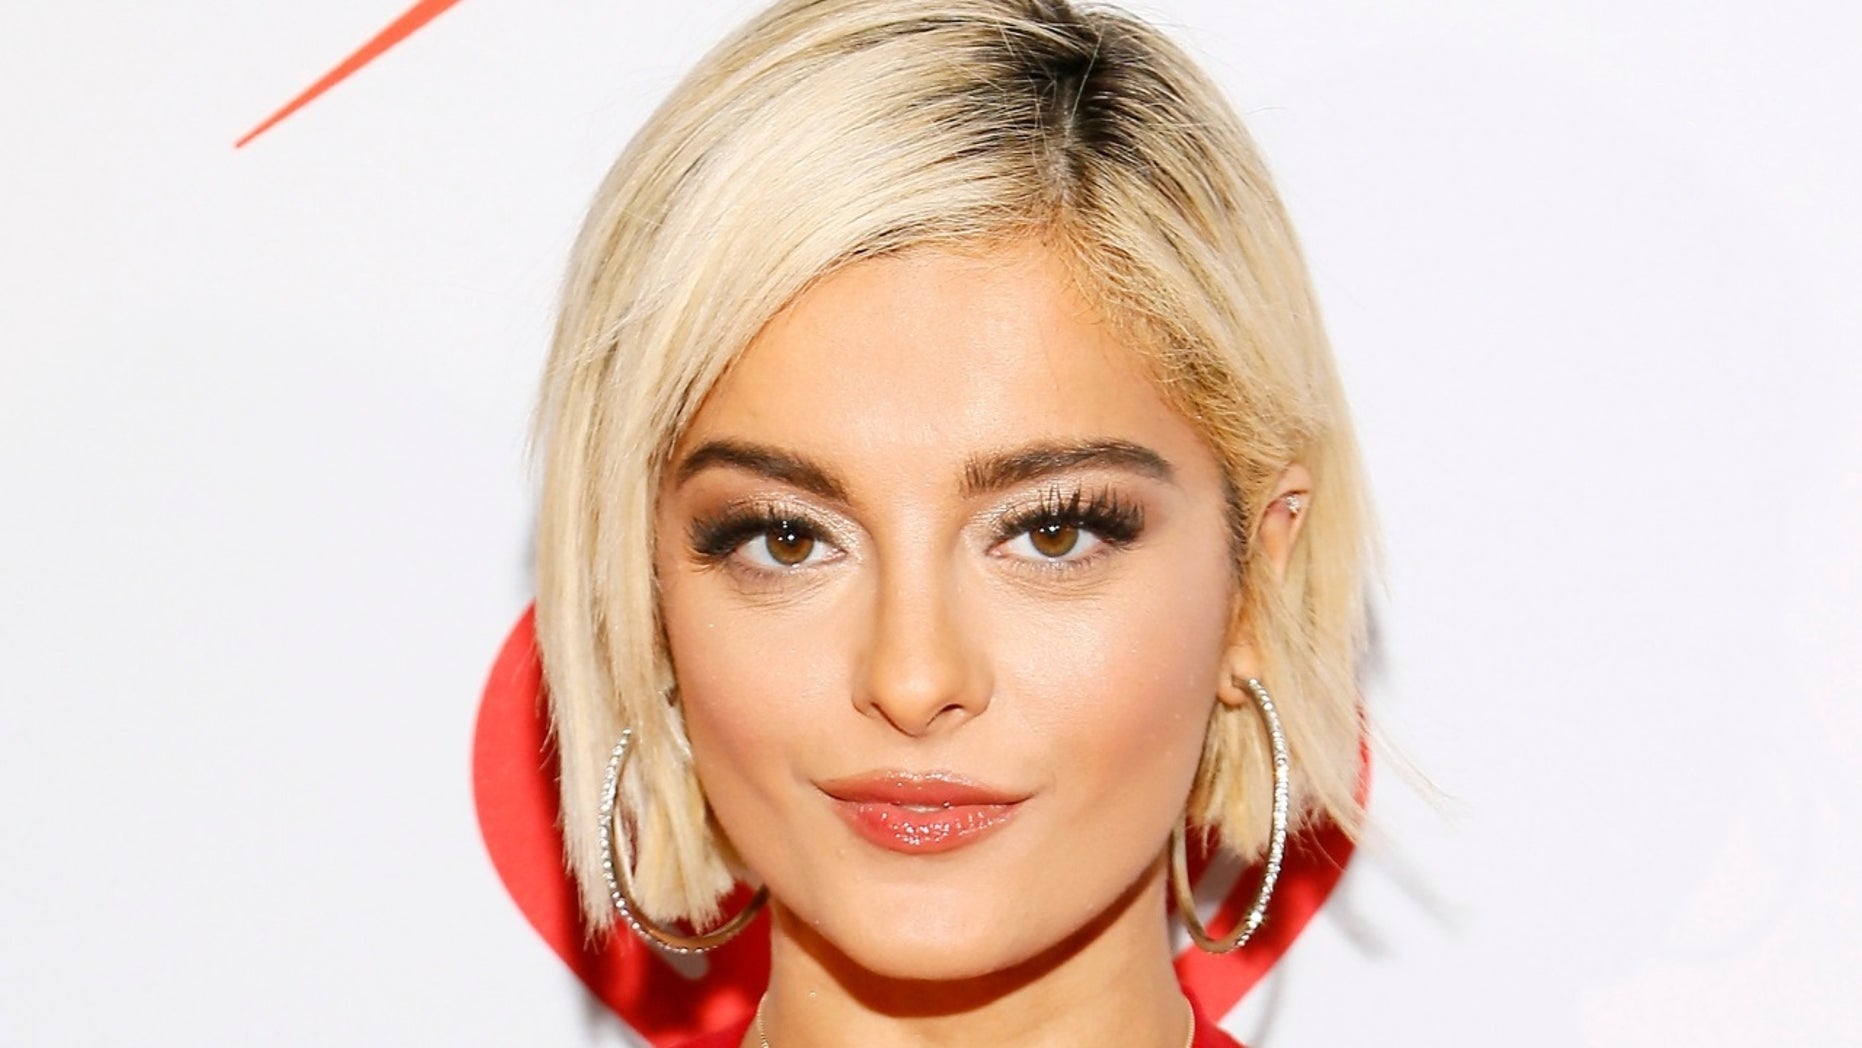 Singer Bebe Rexha calls out unnamed married football player who keeps texting her